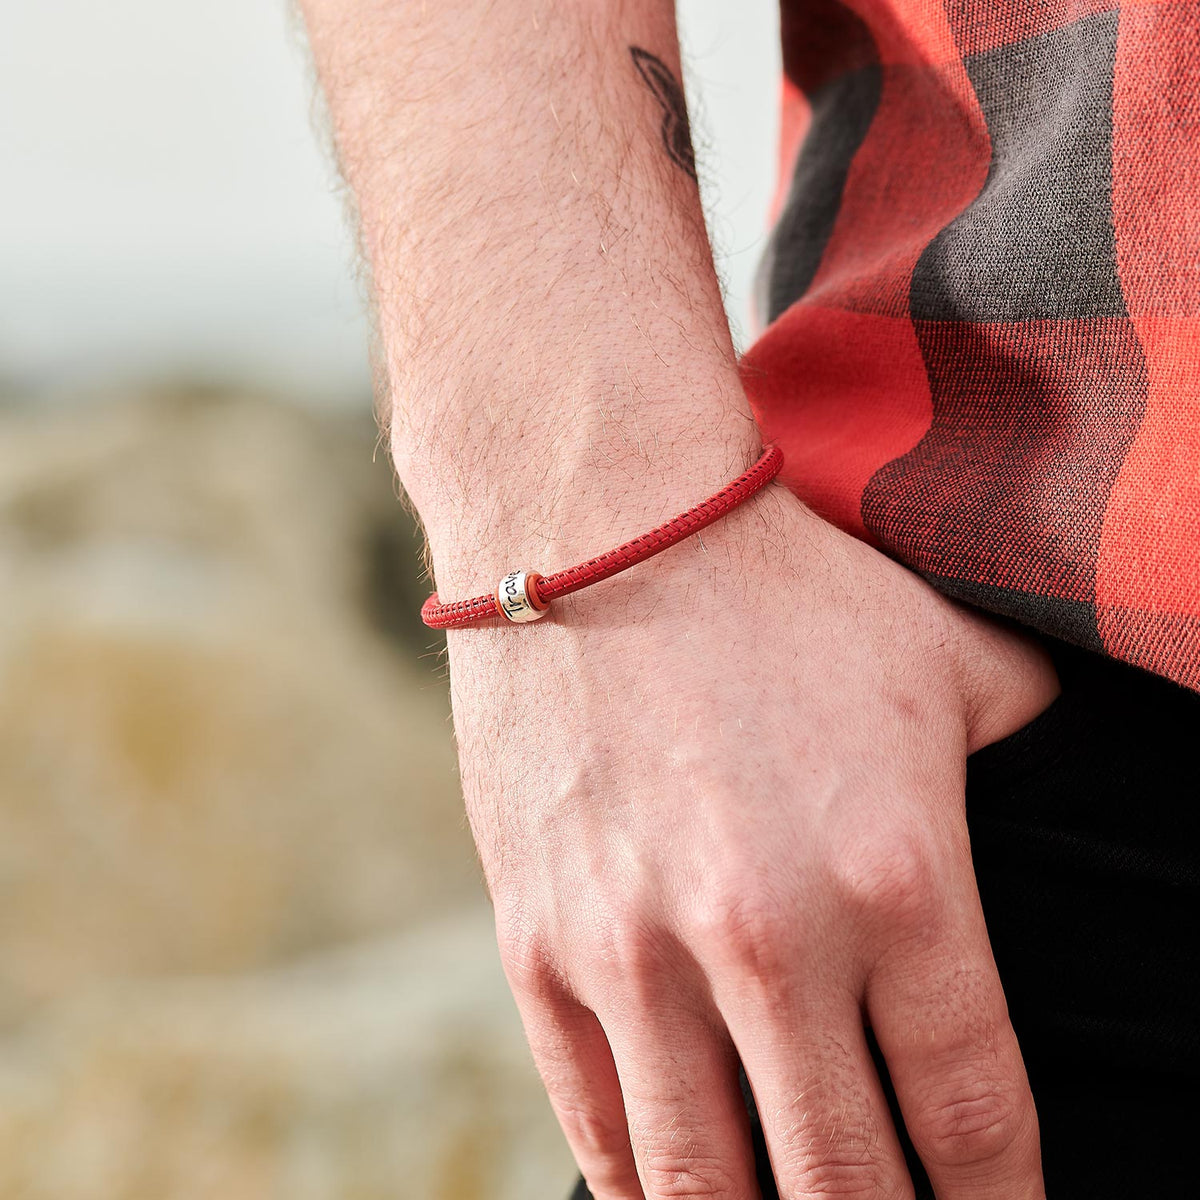 Travel Safe Silver Mens Leather Bracelet - alternative travel gift from Off The map Brighton